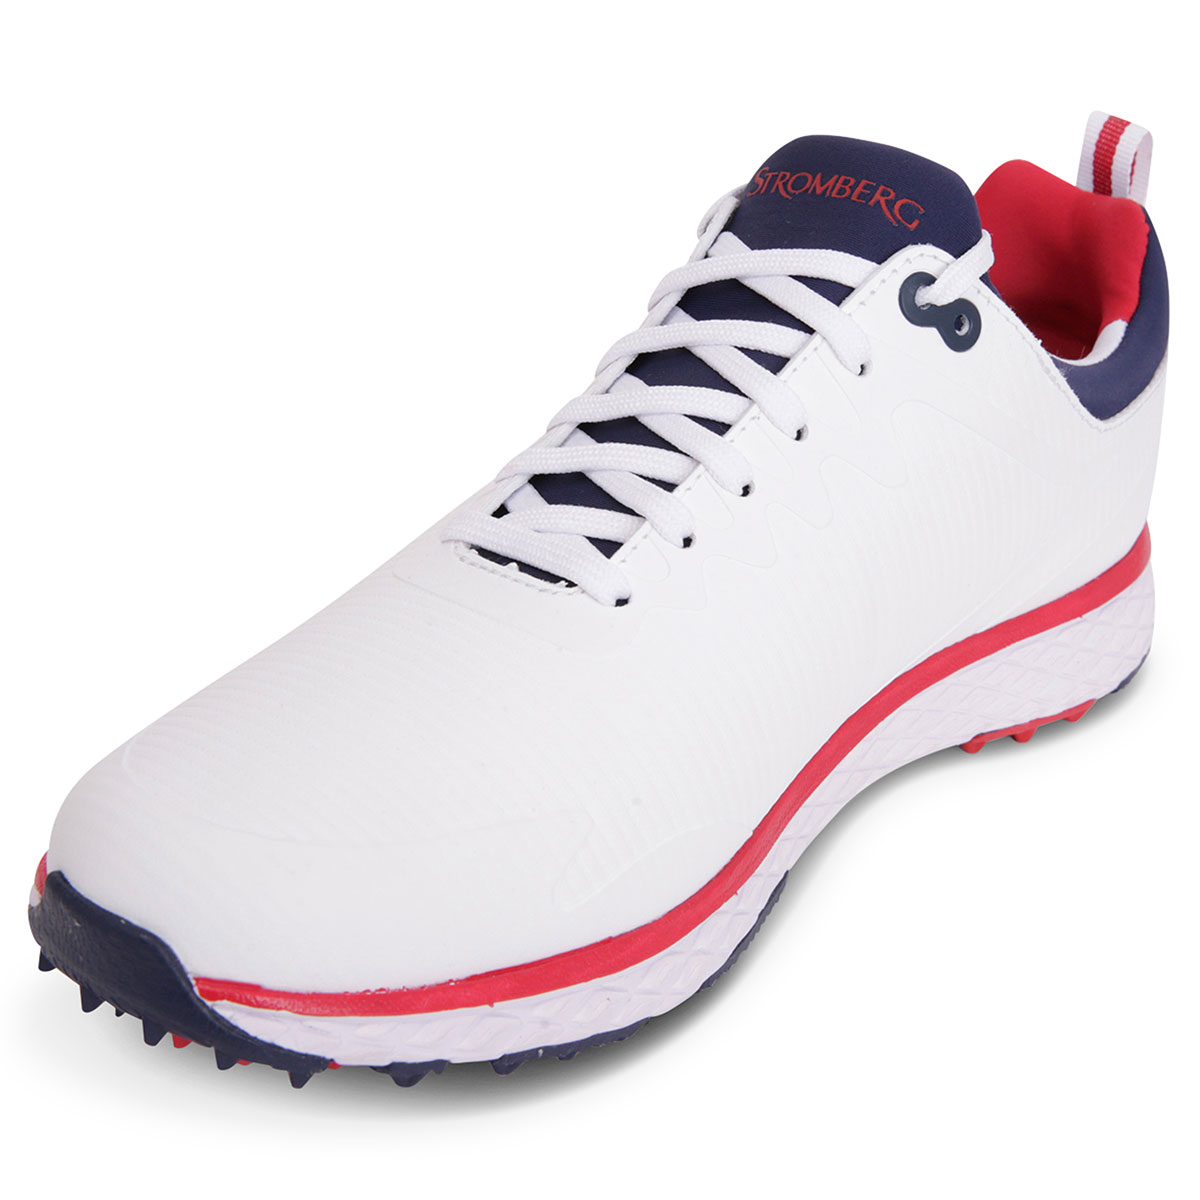 Stromberg Men's Tempo Waterproof Spikeless Golf Shoes from american golf